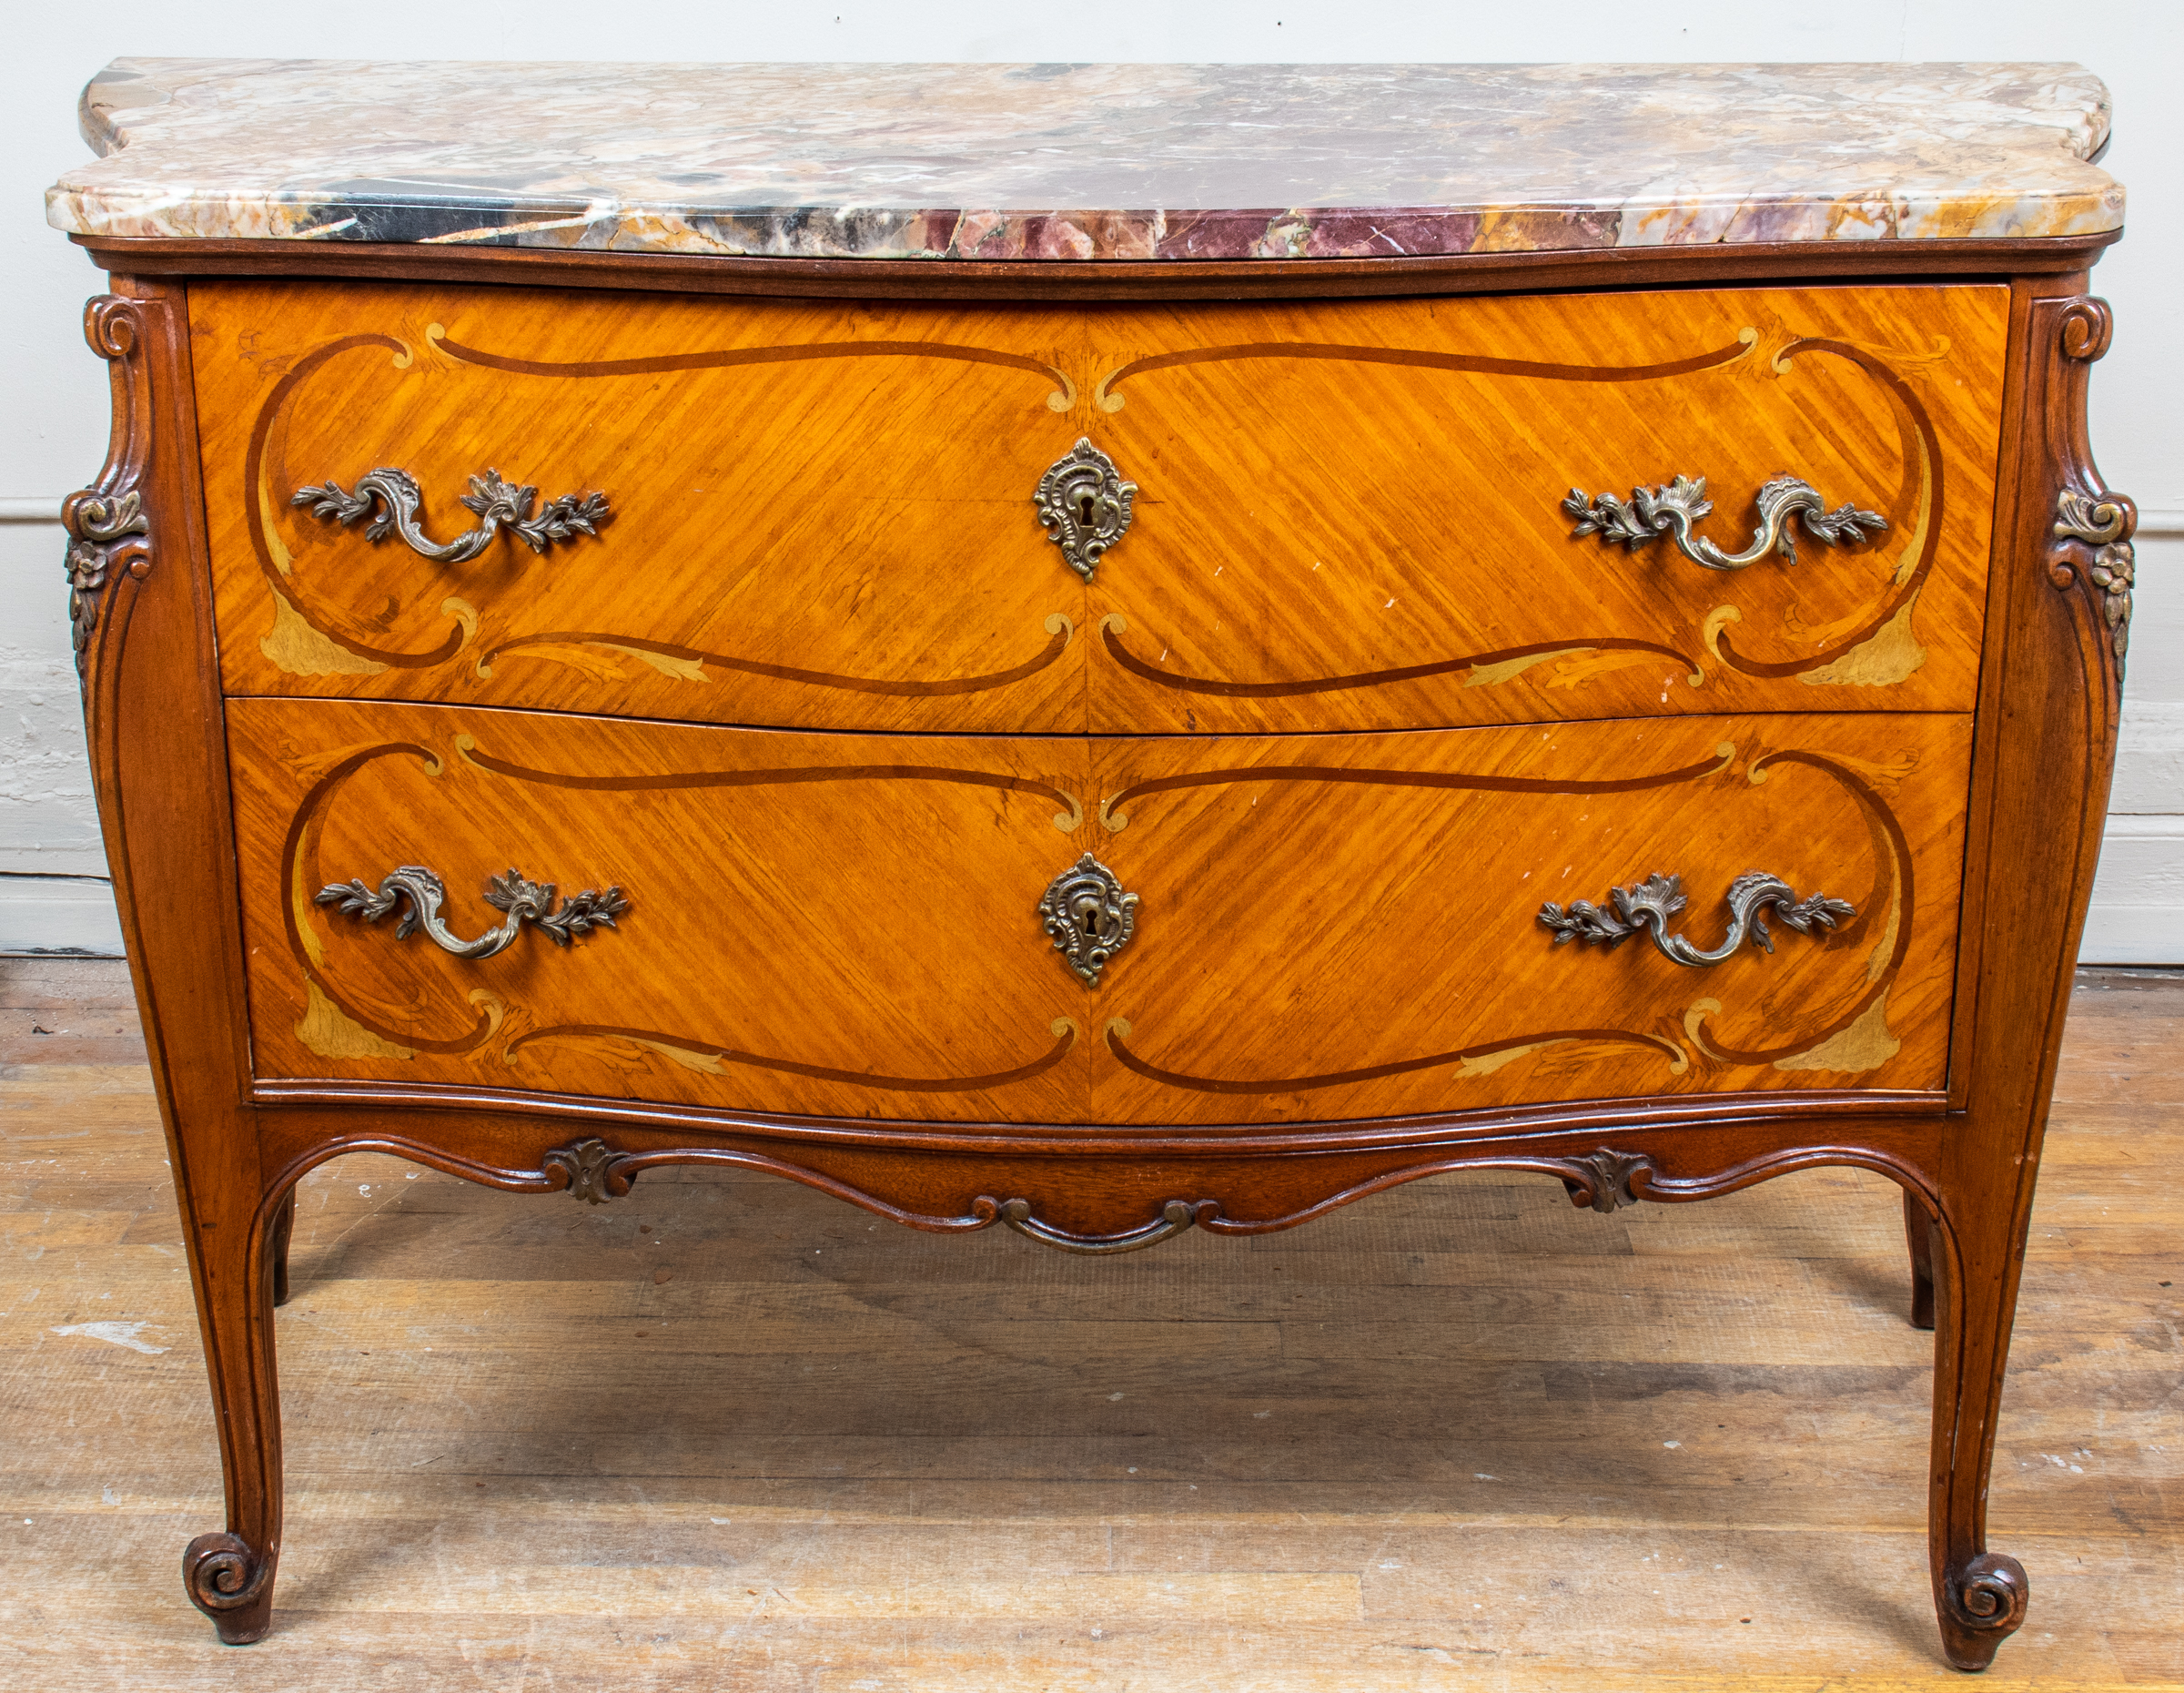 LOUIS XV STYLE MARBLE TOP MARQUETRY 3c35ec